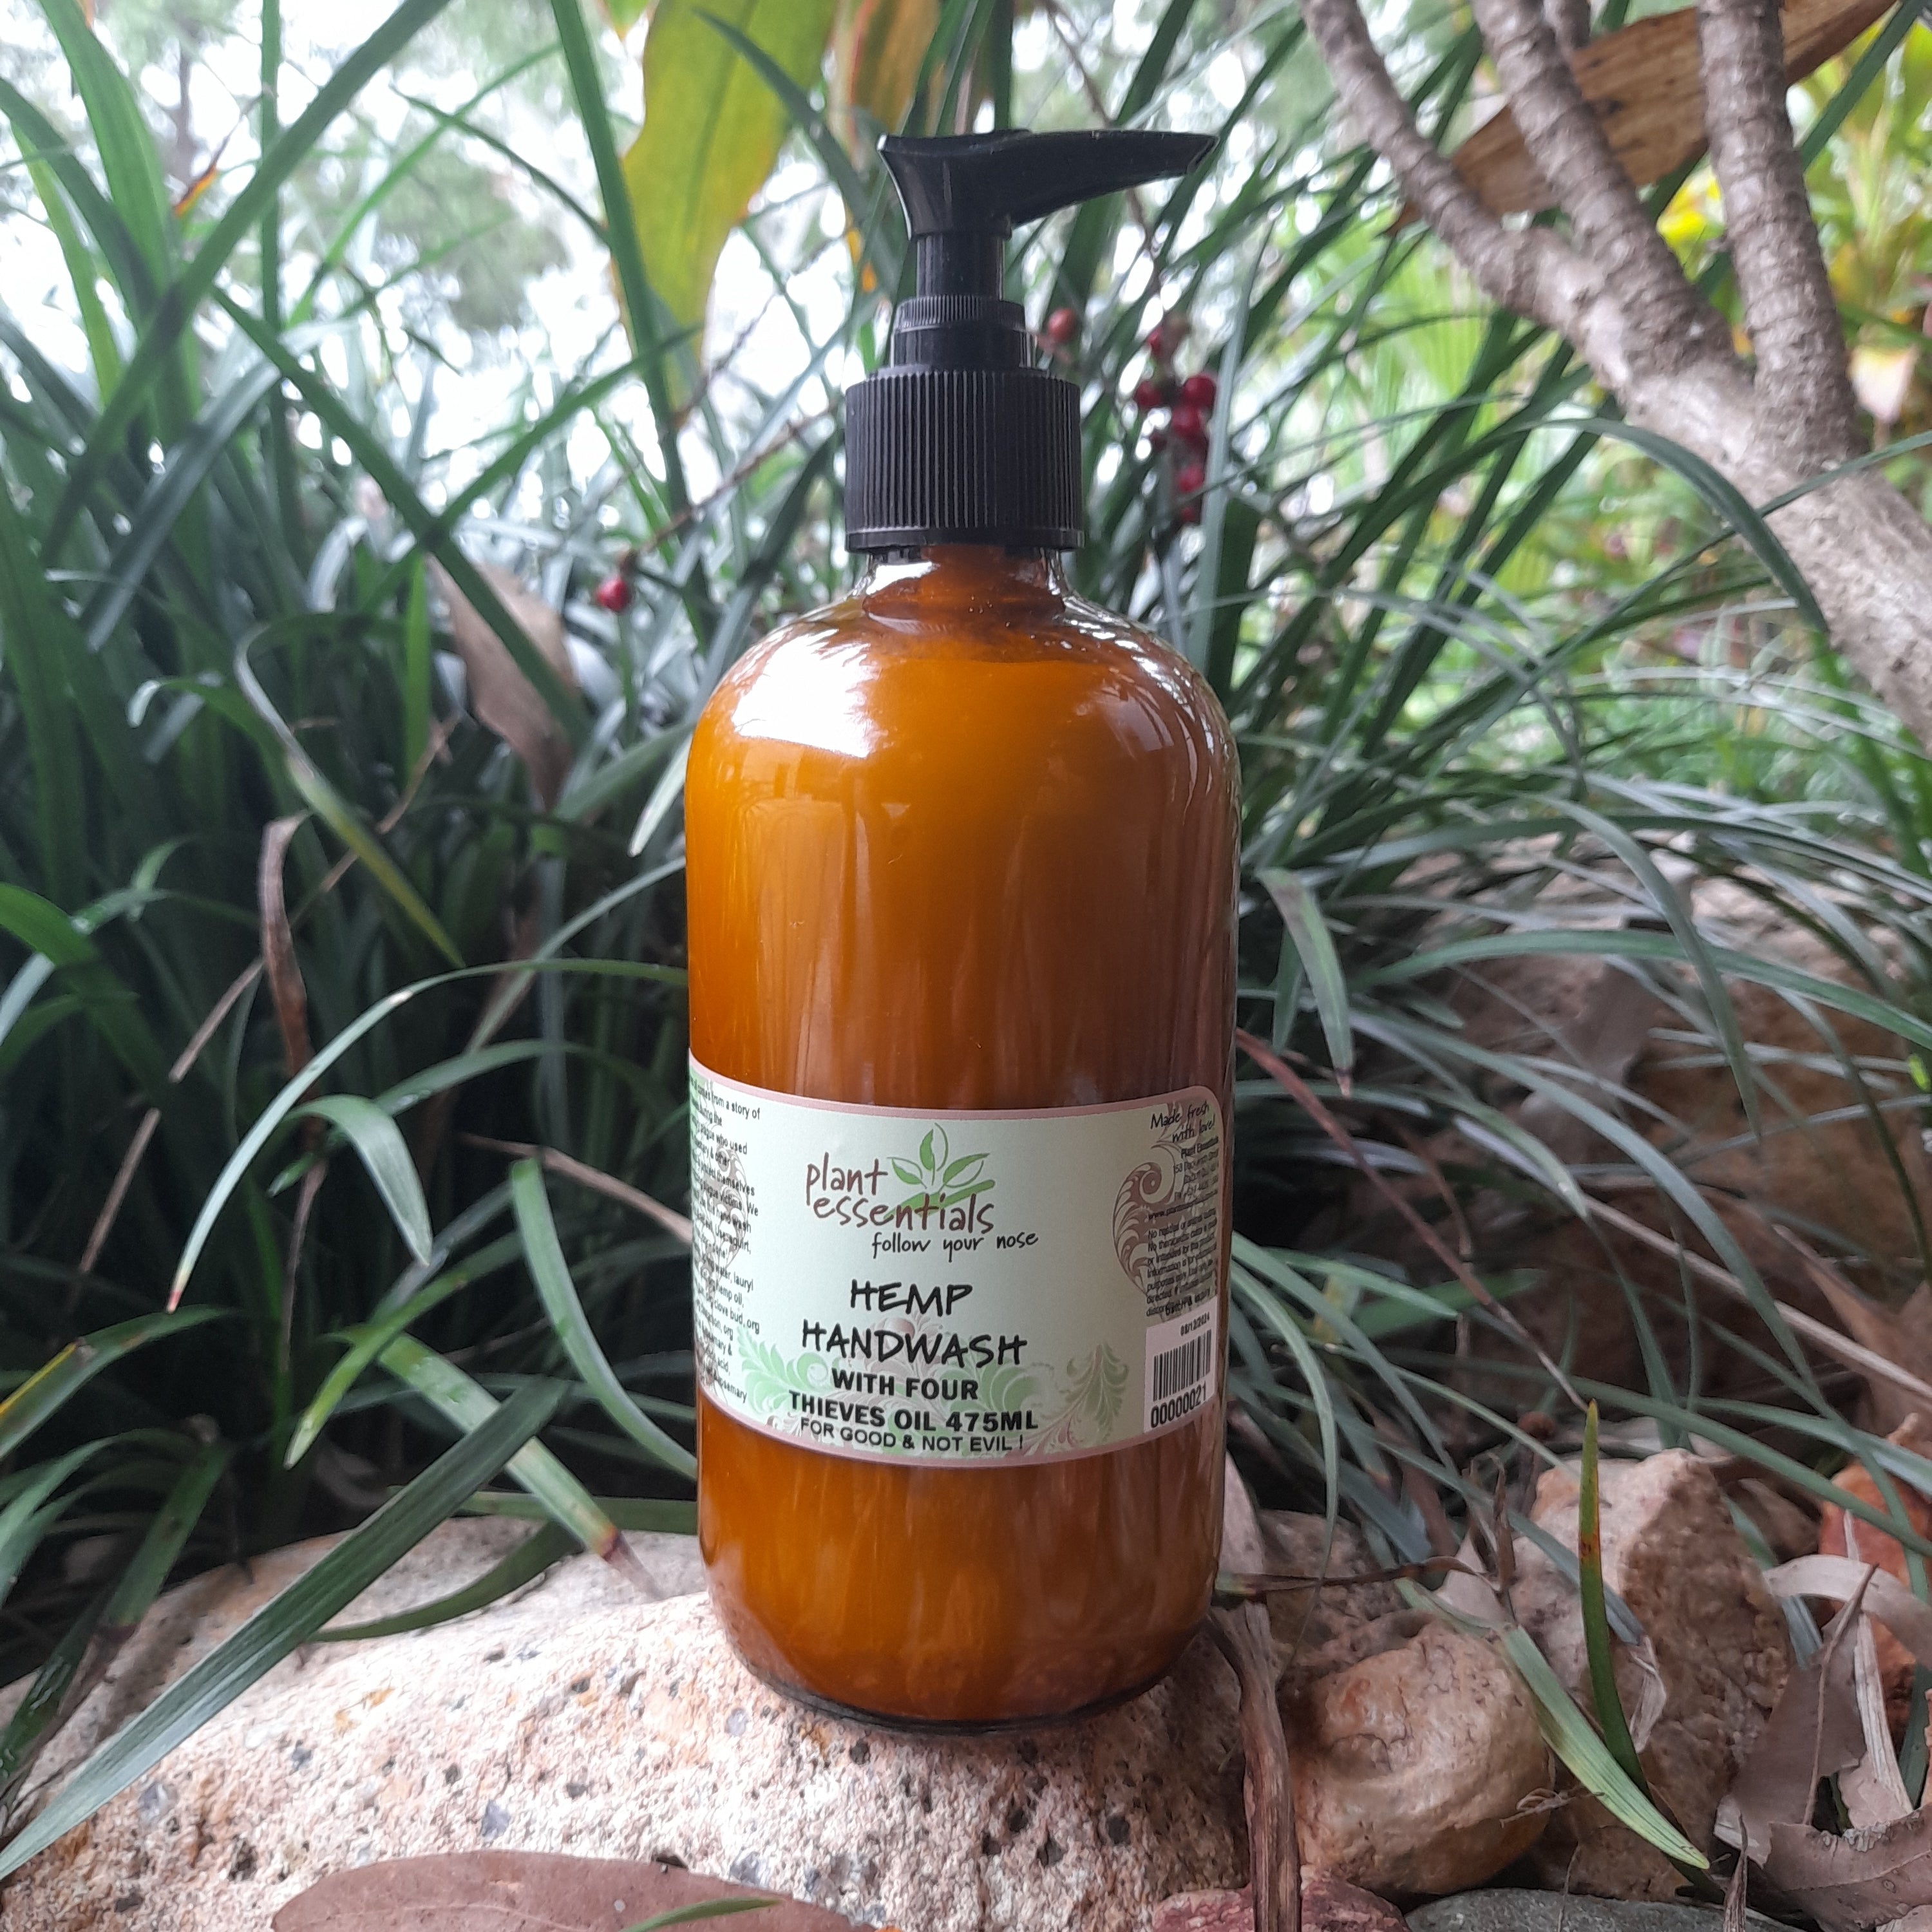 Hemp hand wash with four thieves oil